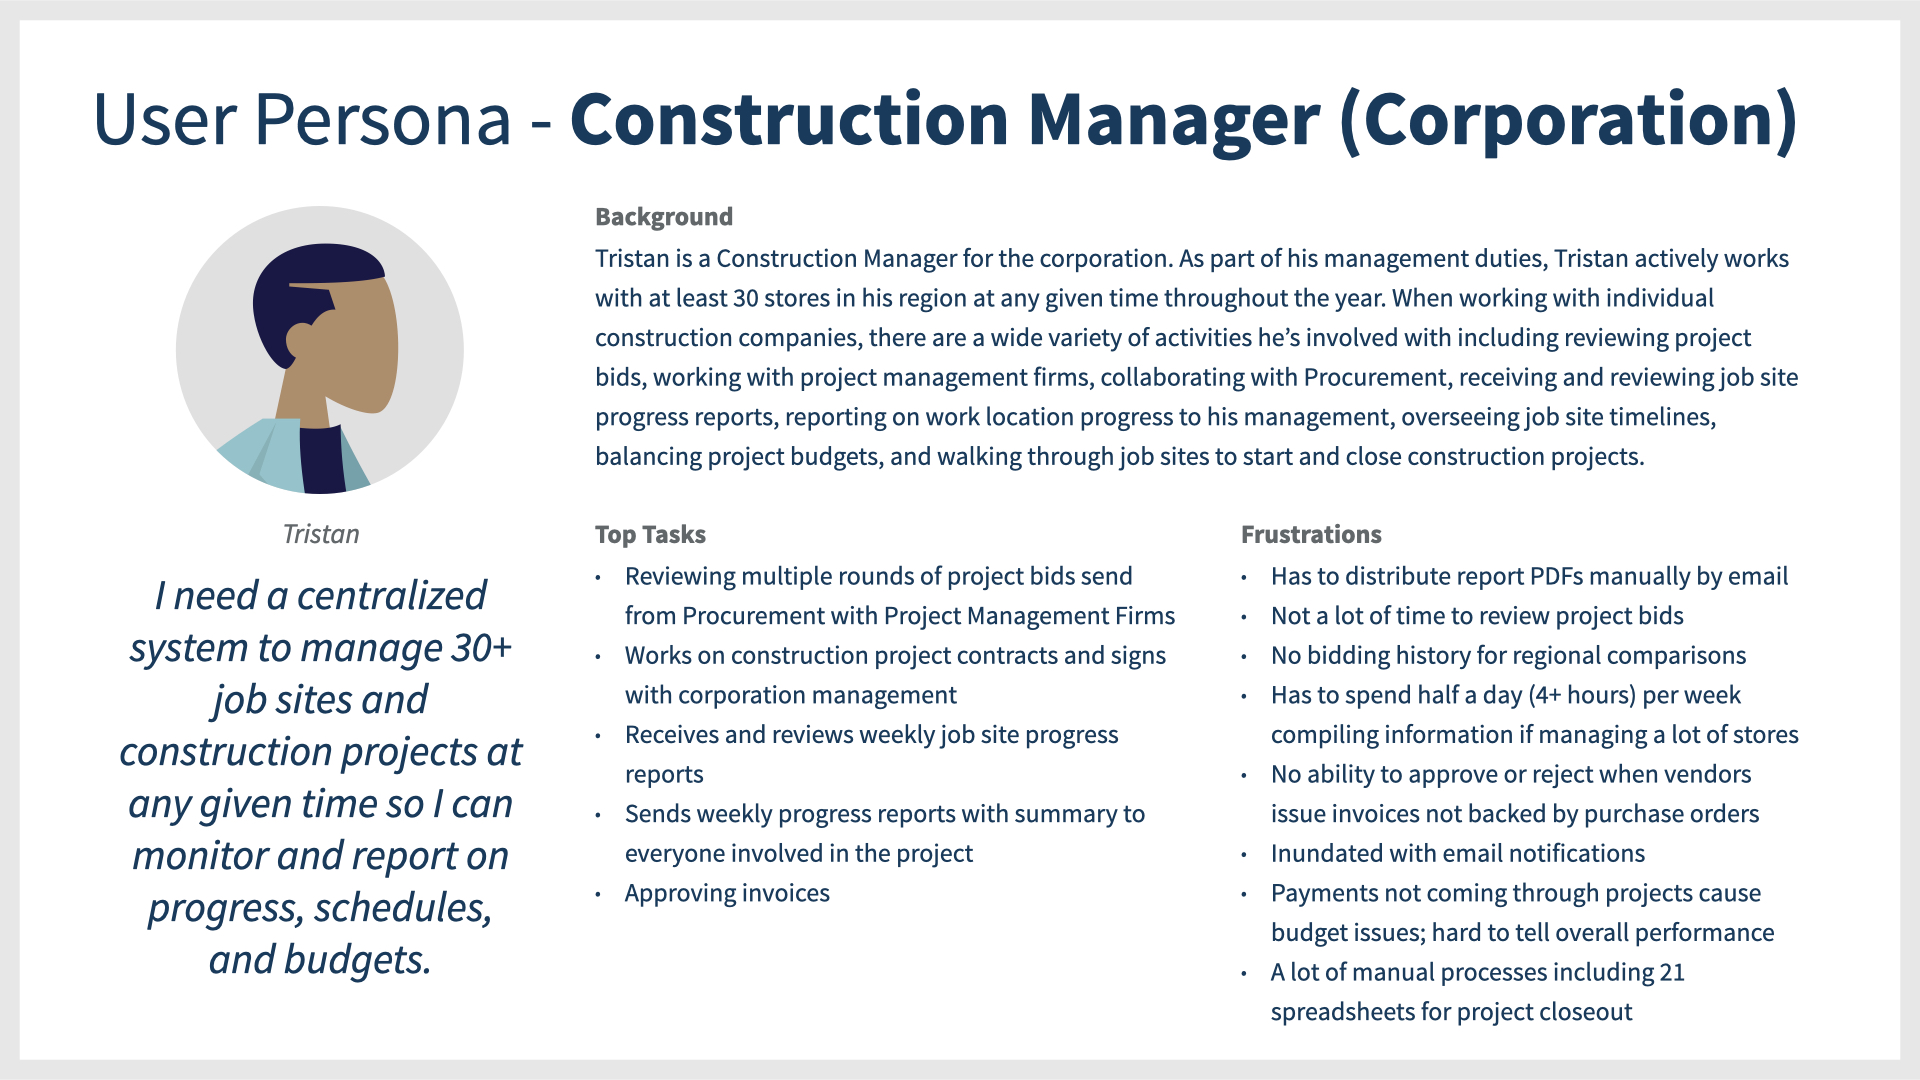 User Persona - Construction Manager